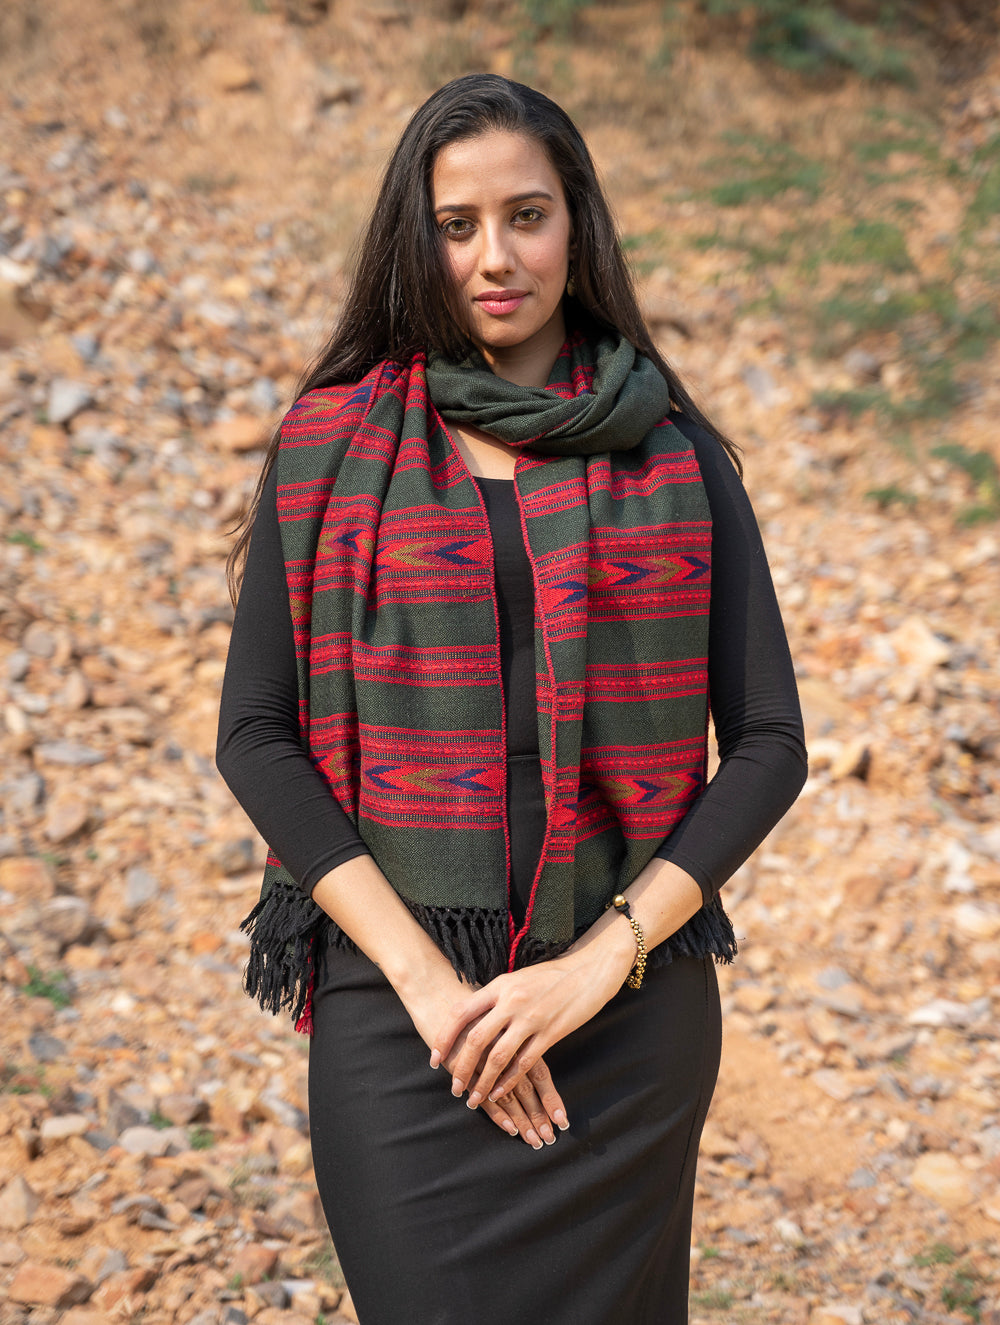 Load image into Gallery viewer, Exclusive, Soft Himachal Wool Stole - 6 Panels, Deep Olive